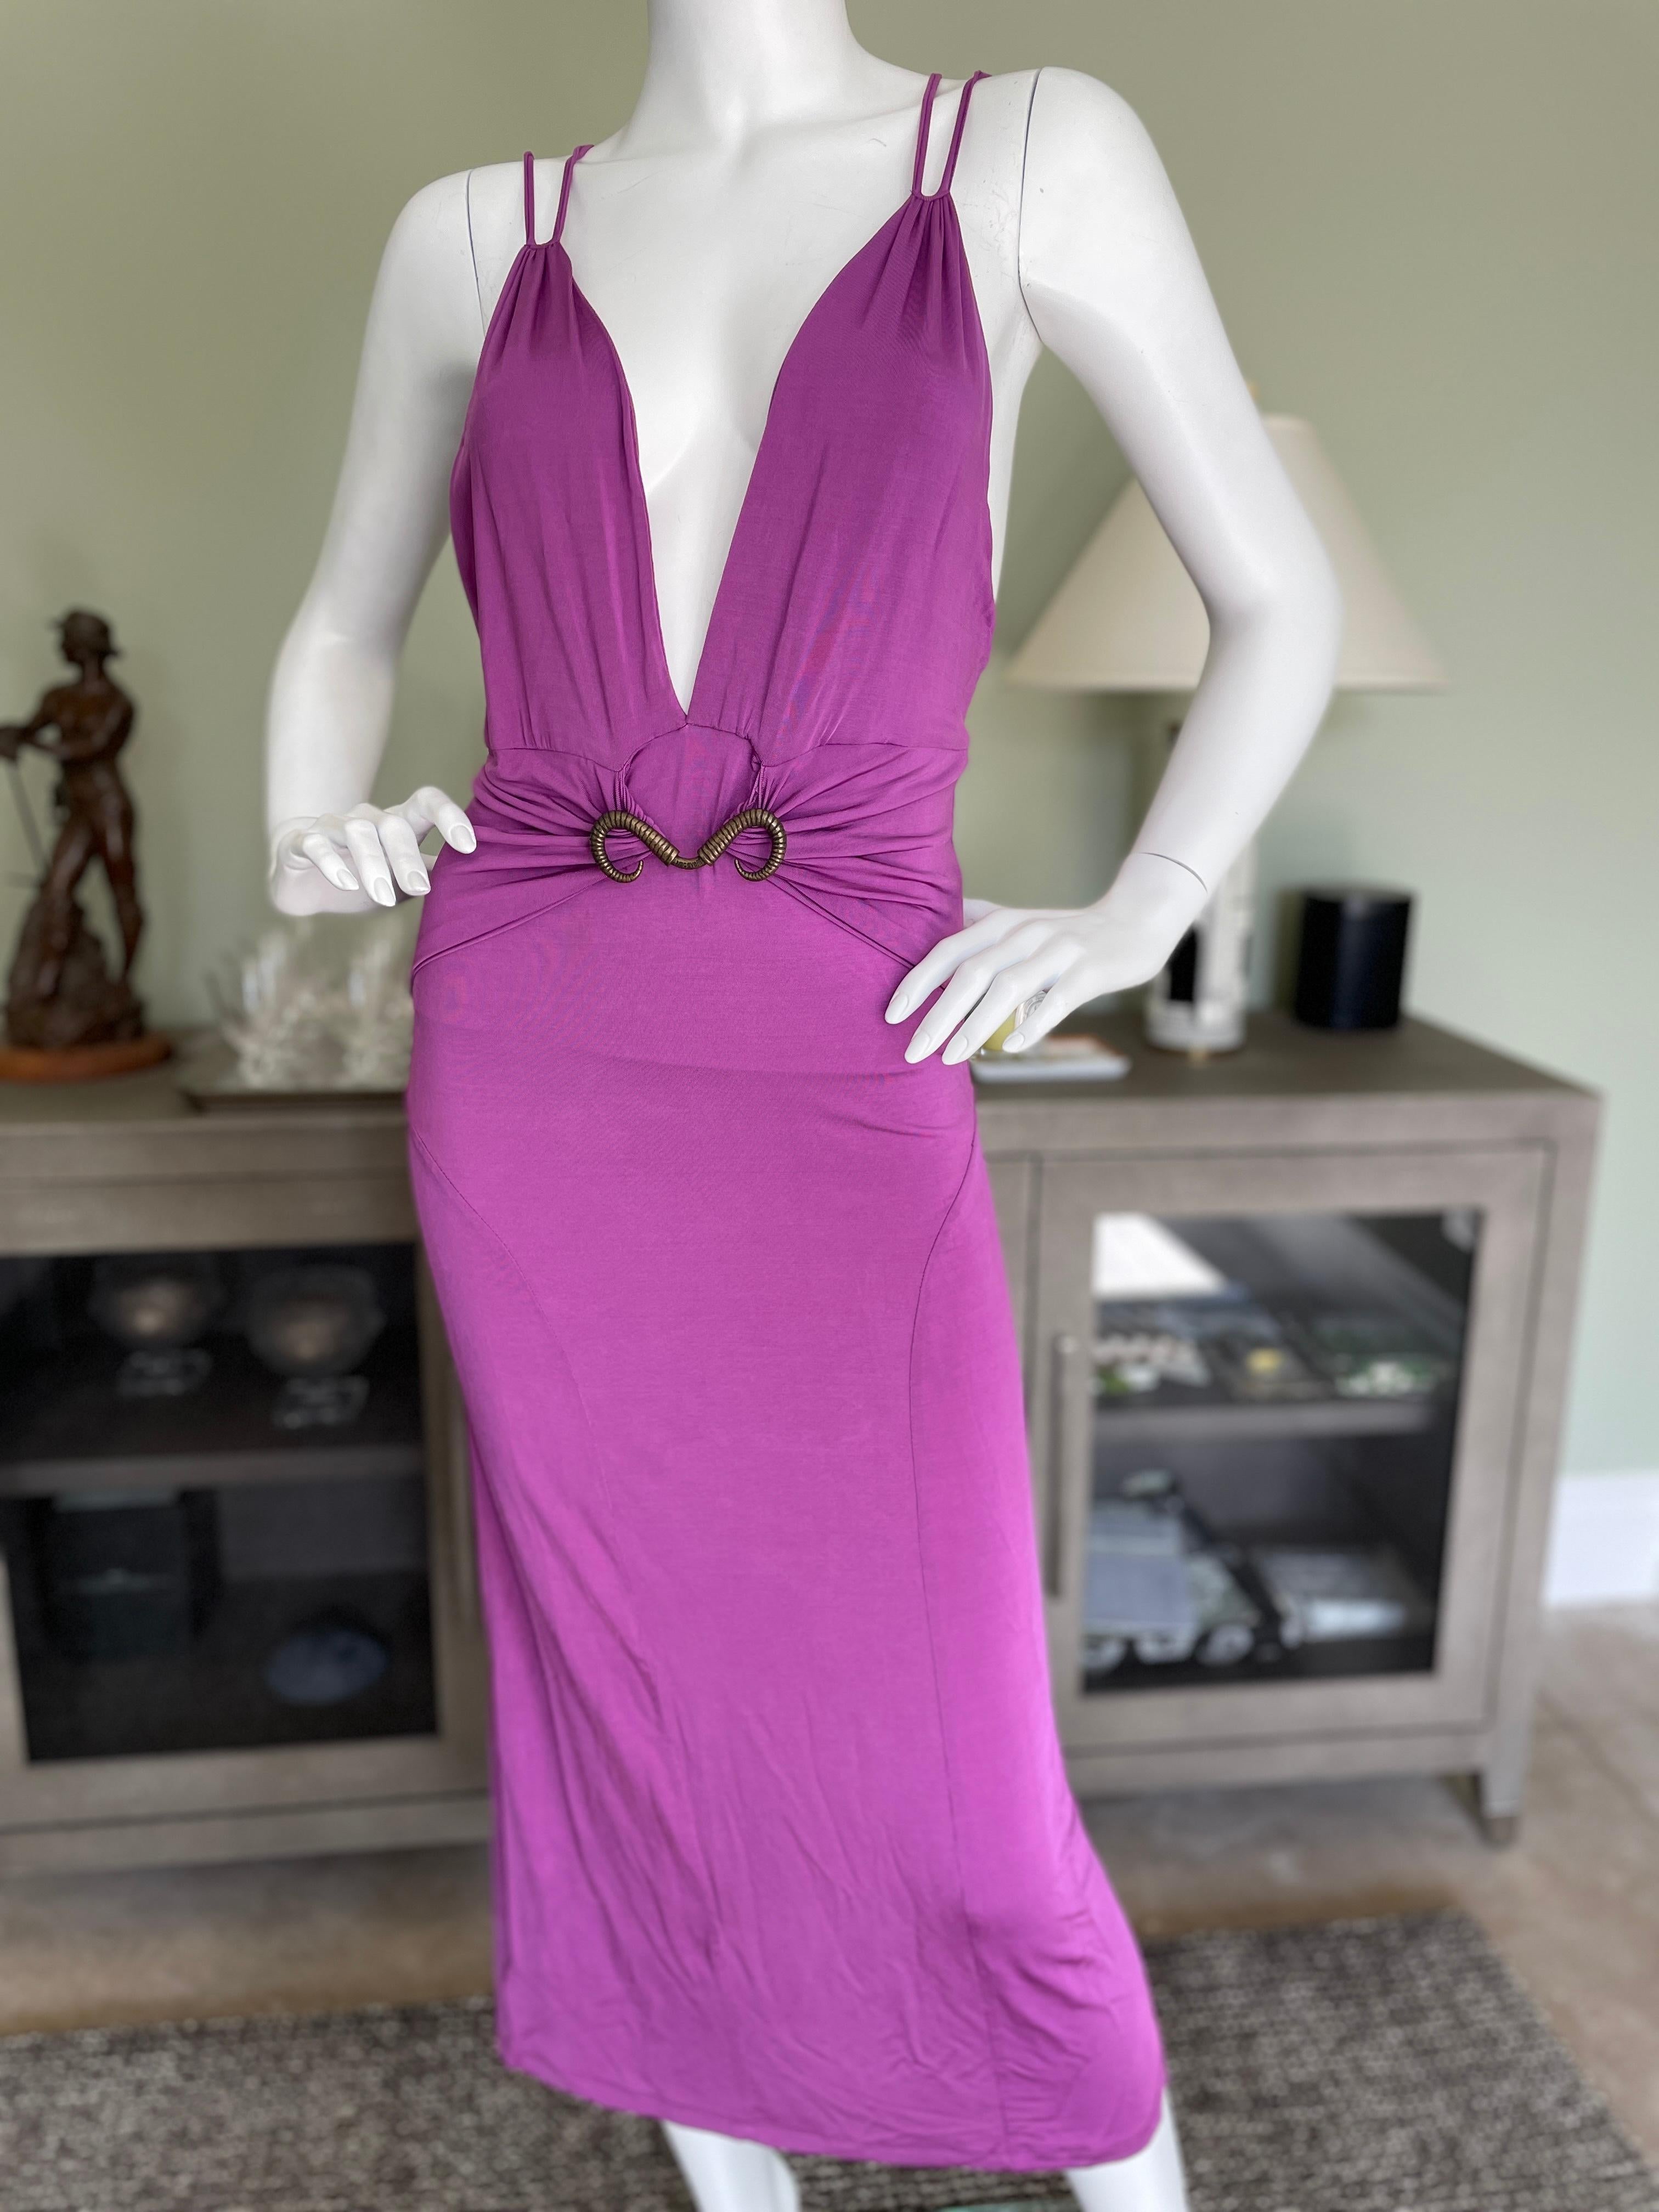 Just Cavalli Plunging Purple Vintage Dress w Snake Buckle by Roberto Cavalli 
 This is so pretty, looks better on live model.
Size 46, runs small.
  Bust 34